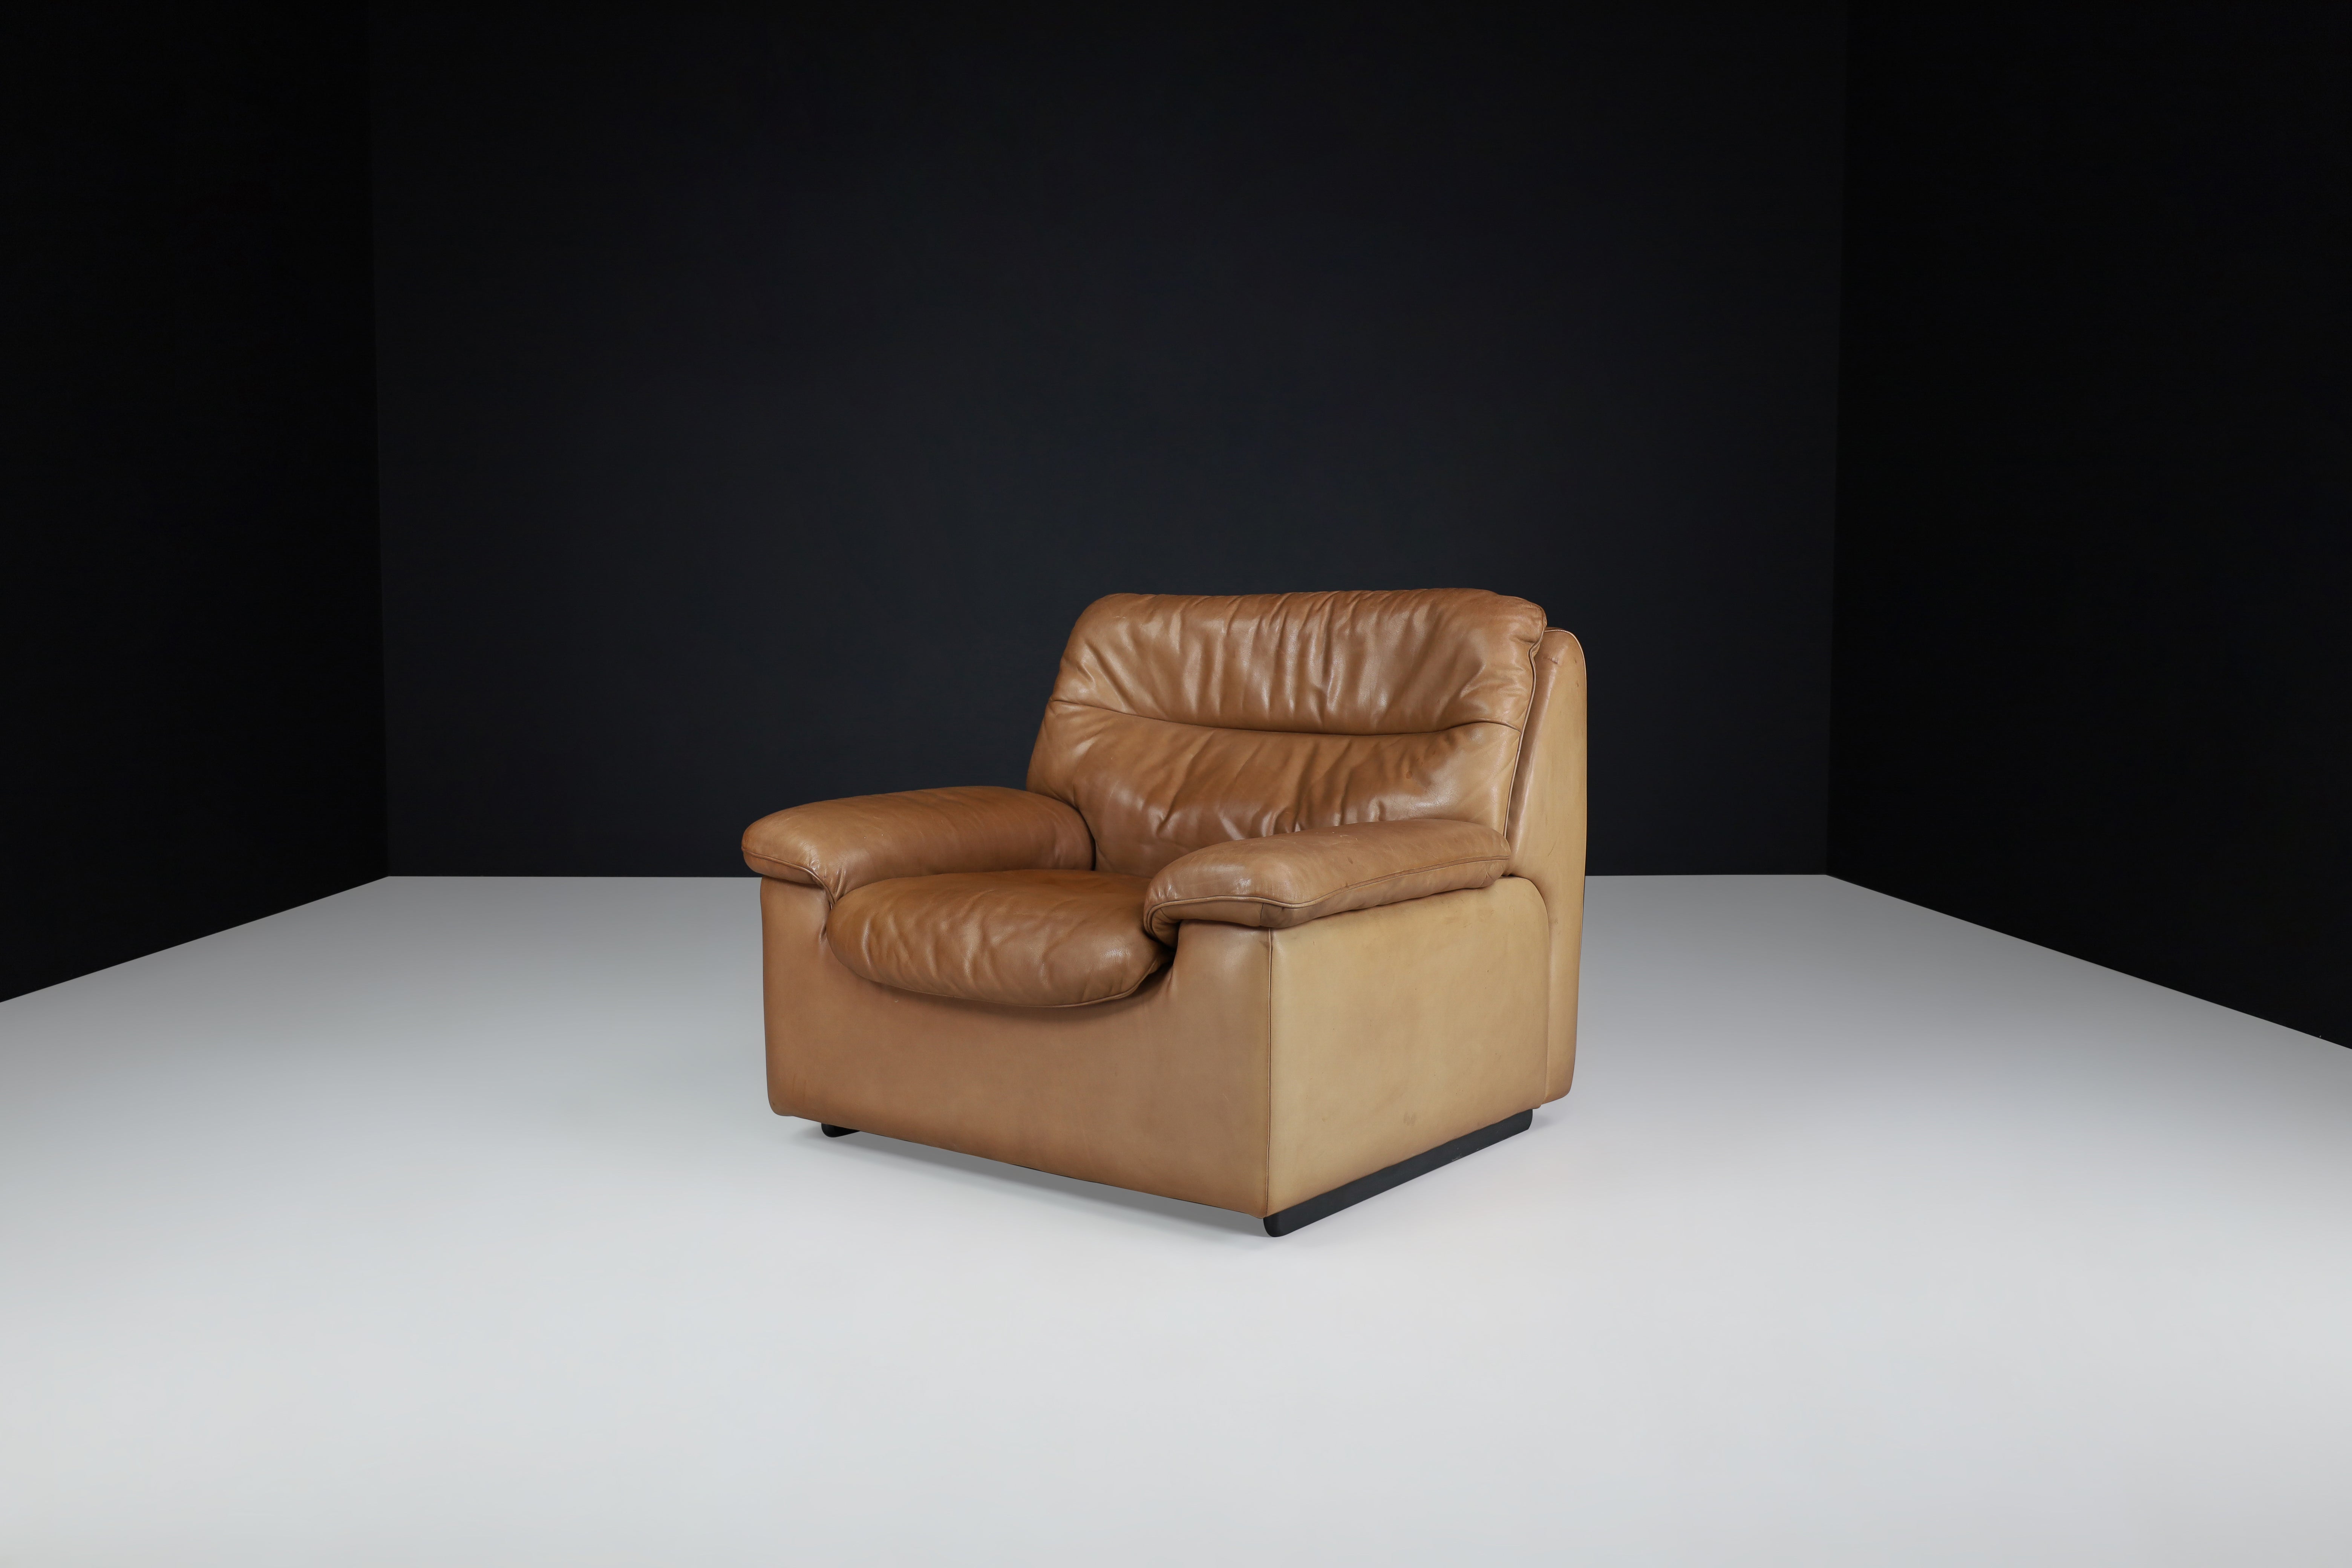 De Sede Ds 63 Lounge Chair in Patinated Leather, Switzerland, 1970s For Sale